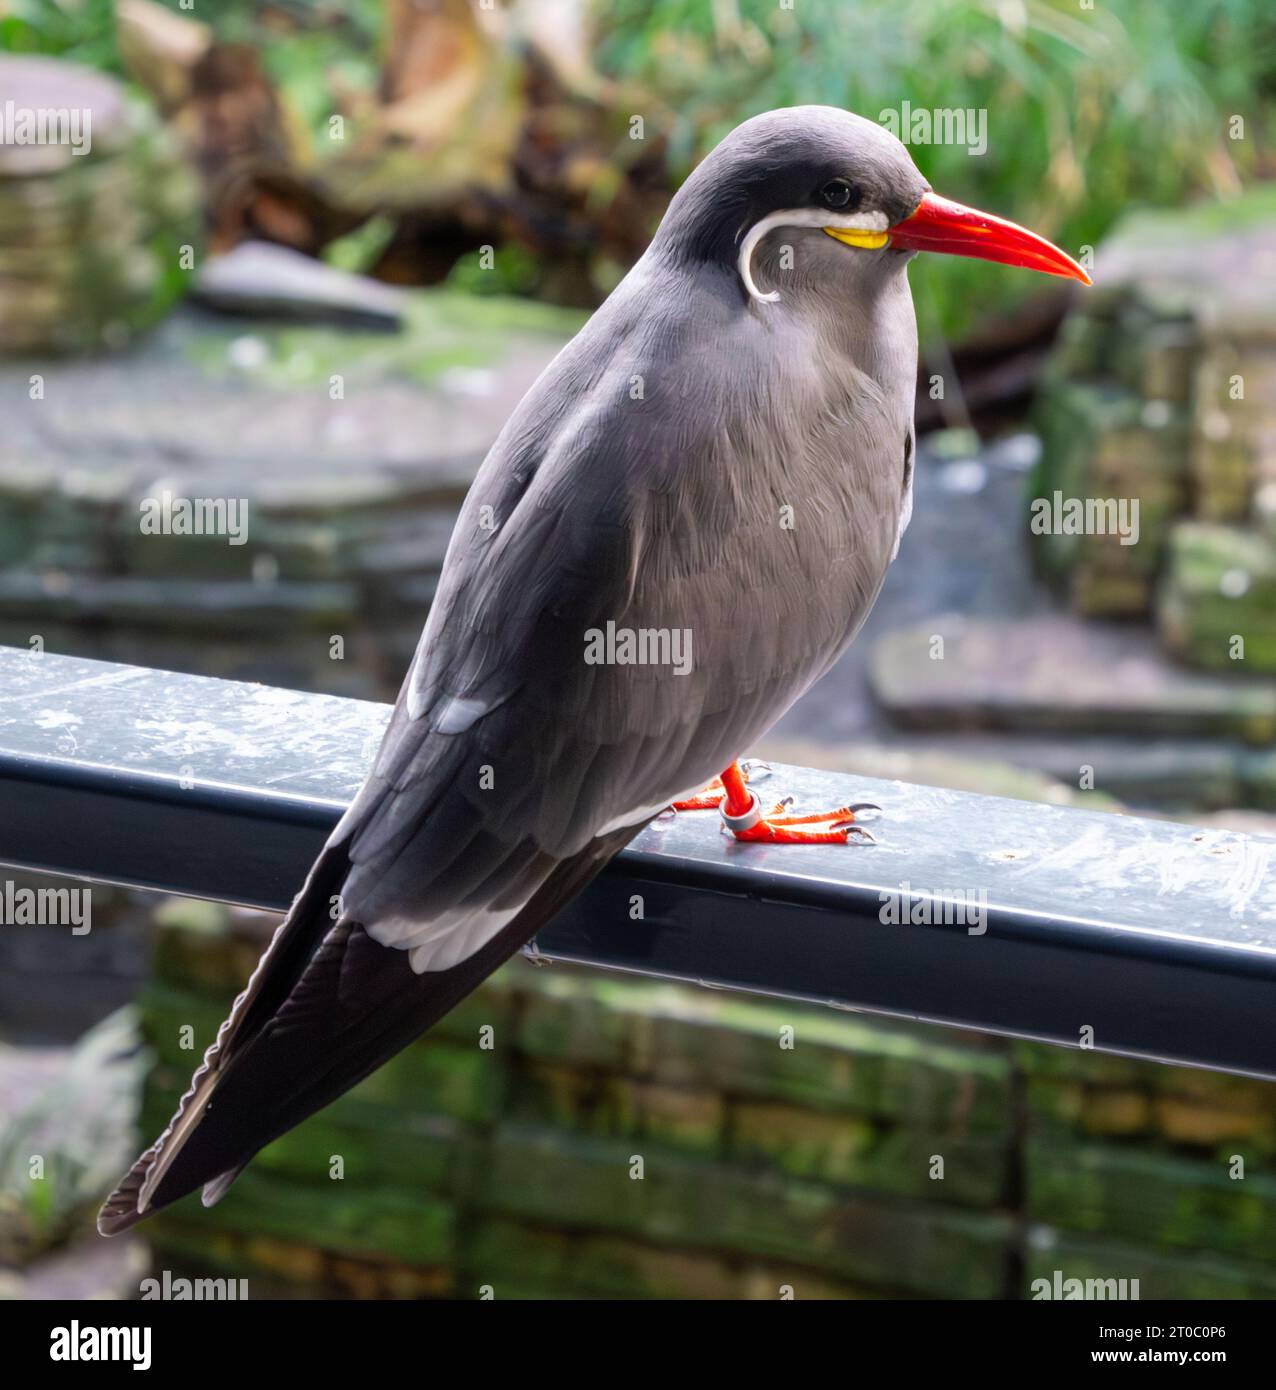 Inca tern (scientific name: Larosterna inca) is a dark gray bird with some white plumes. It is characterized by its white mustache Stock Photo